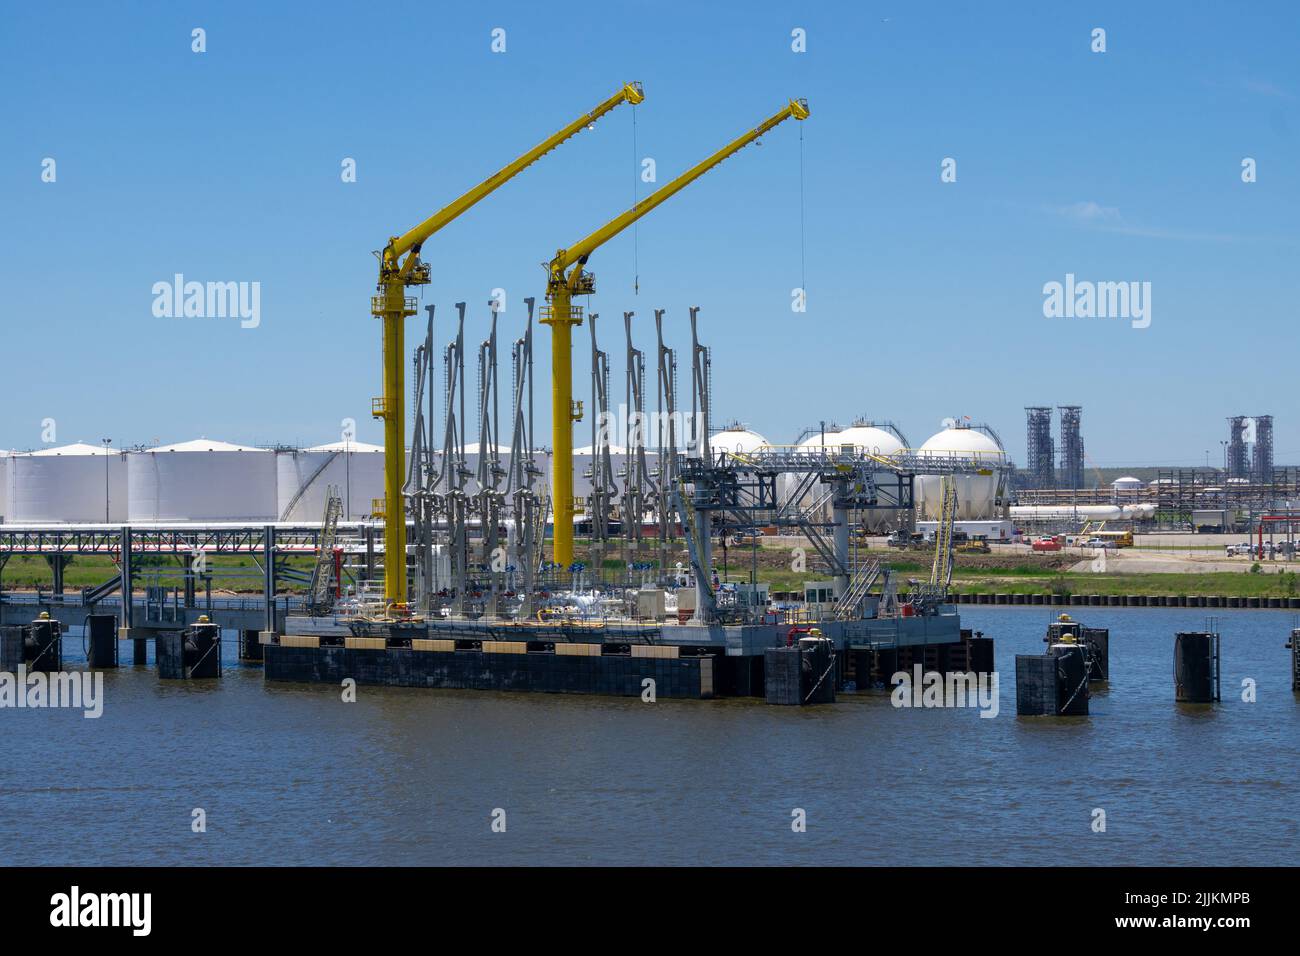 Port of Houston industrial oil, chemical storage tanks. Oil, Chemical terminal loading arms. Stock Photo